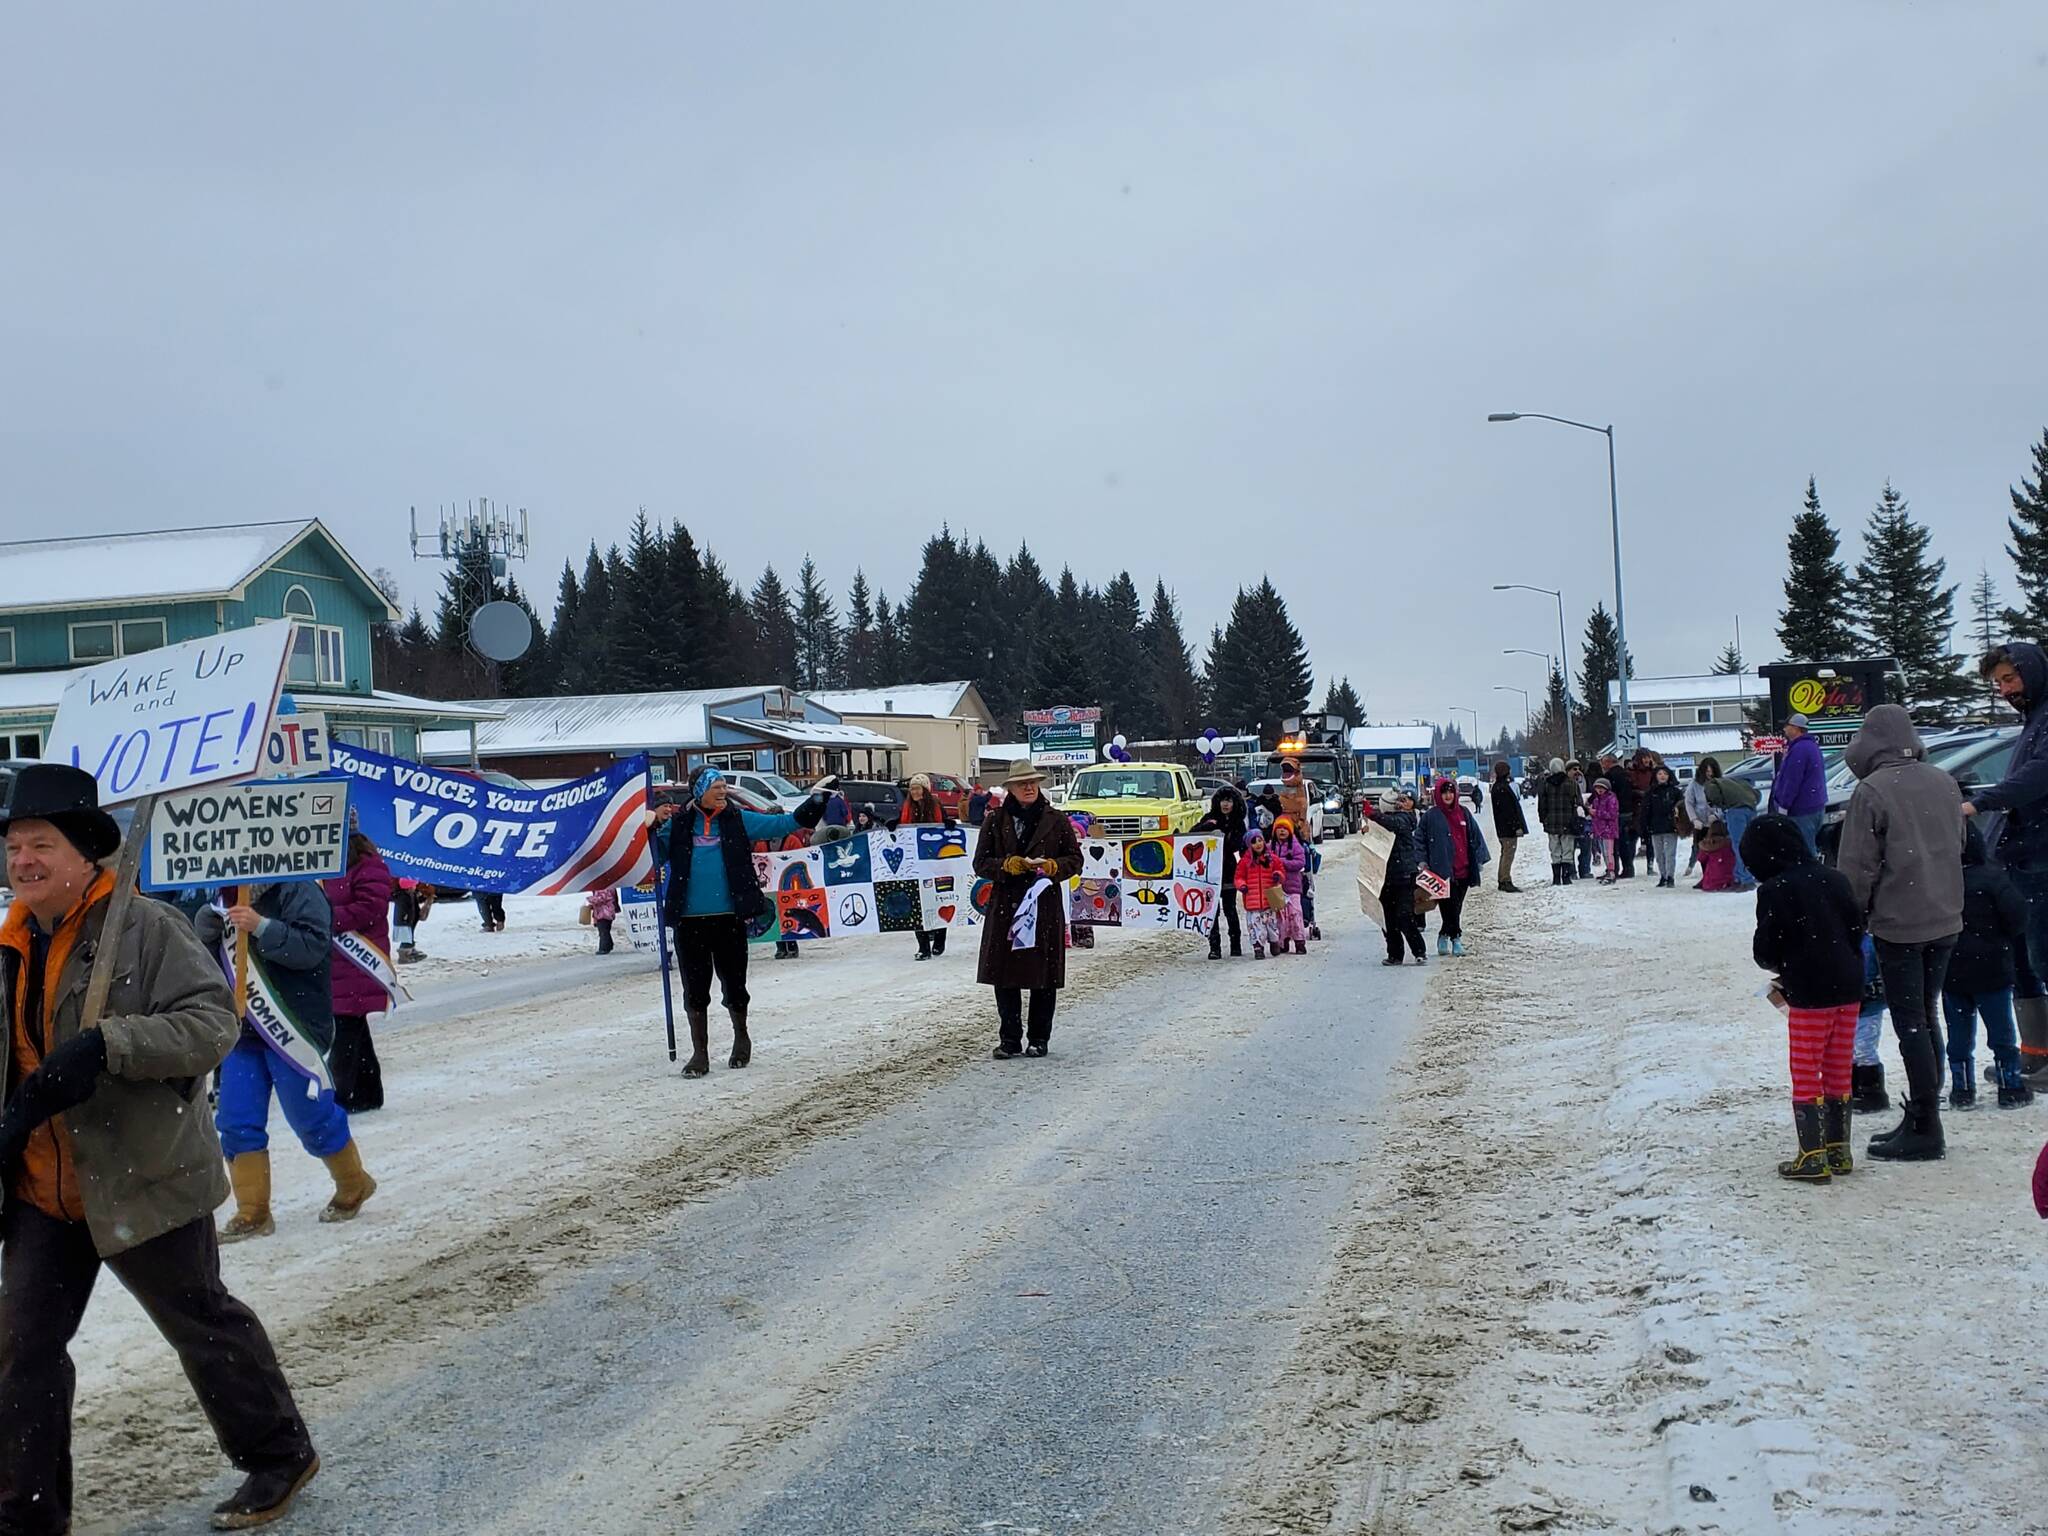 Photo by Delcenia Cosman
Homer residents watch parade participants walk down Pioneer Avenue in the 69th Annual Winter Carnival Parade on Saturday, Feb. 11, 2023 in Homer, Alaska.